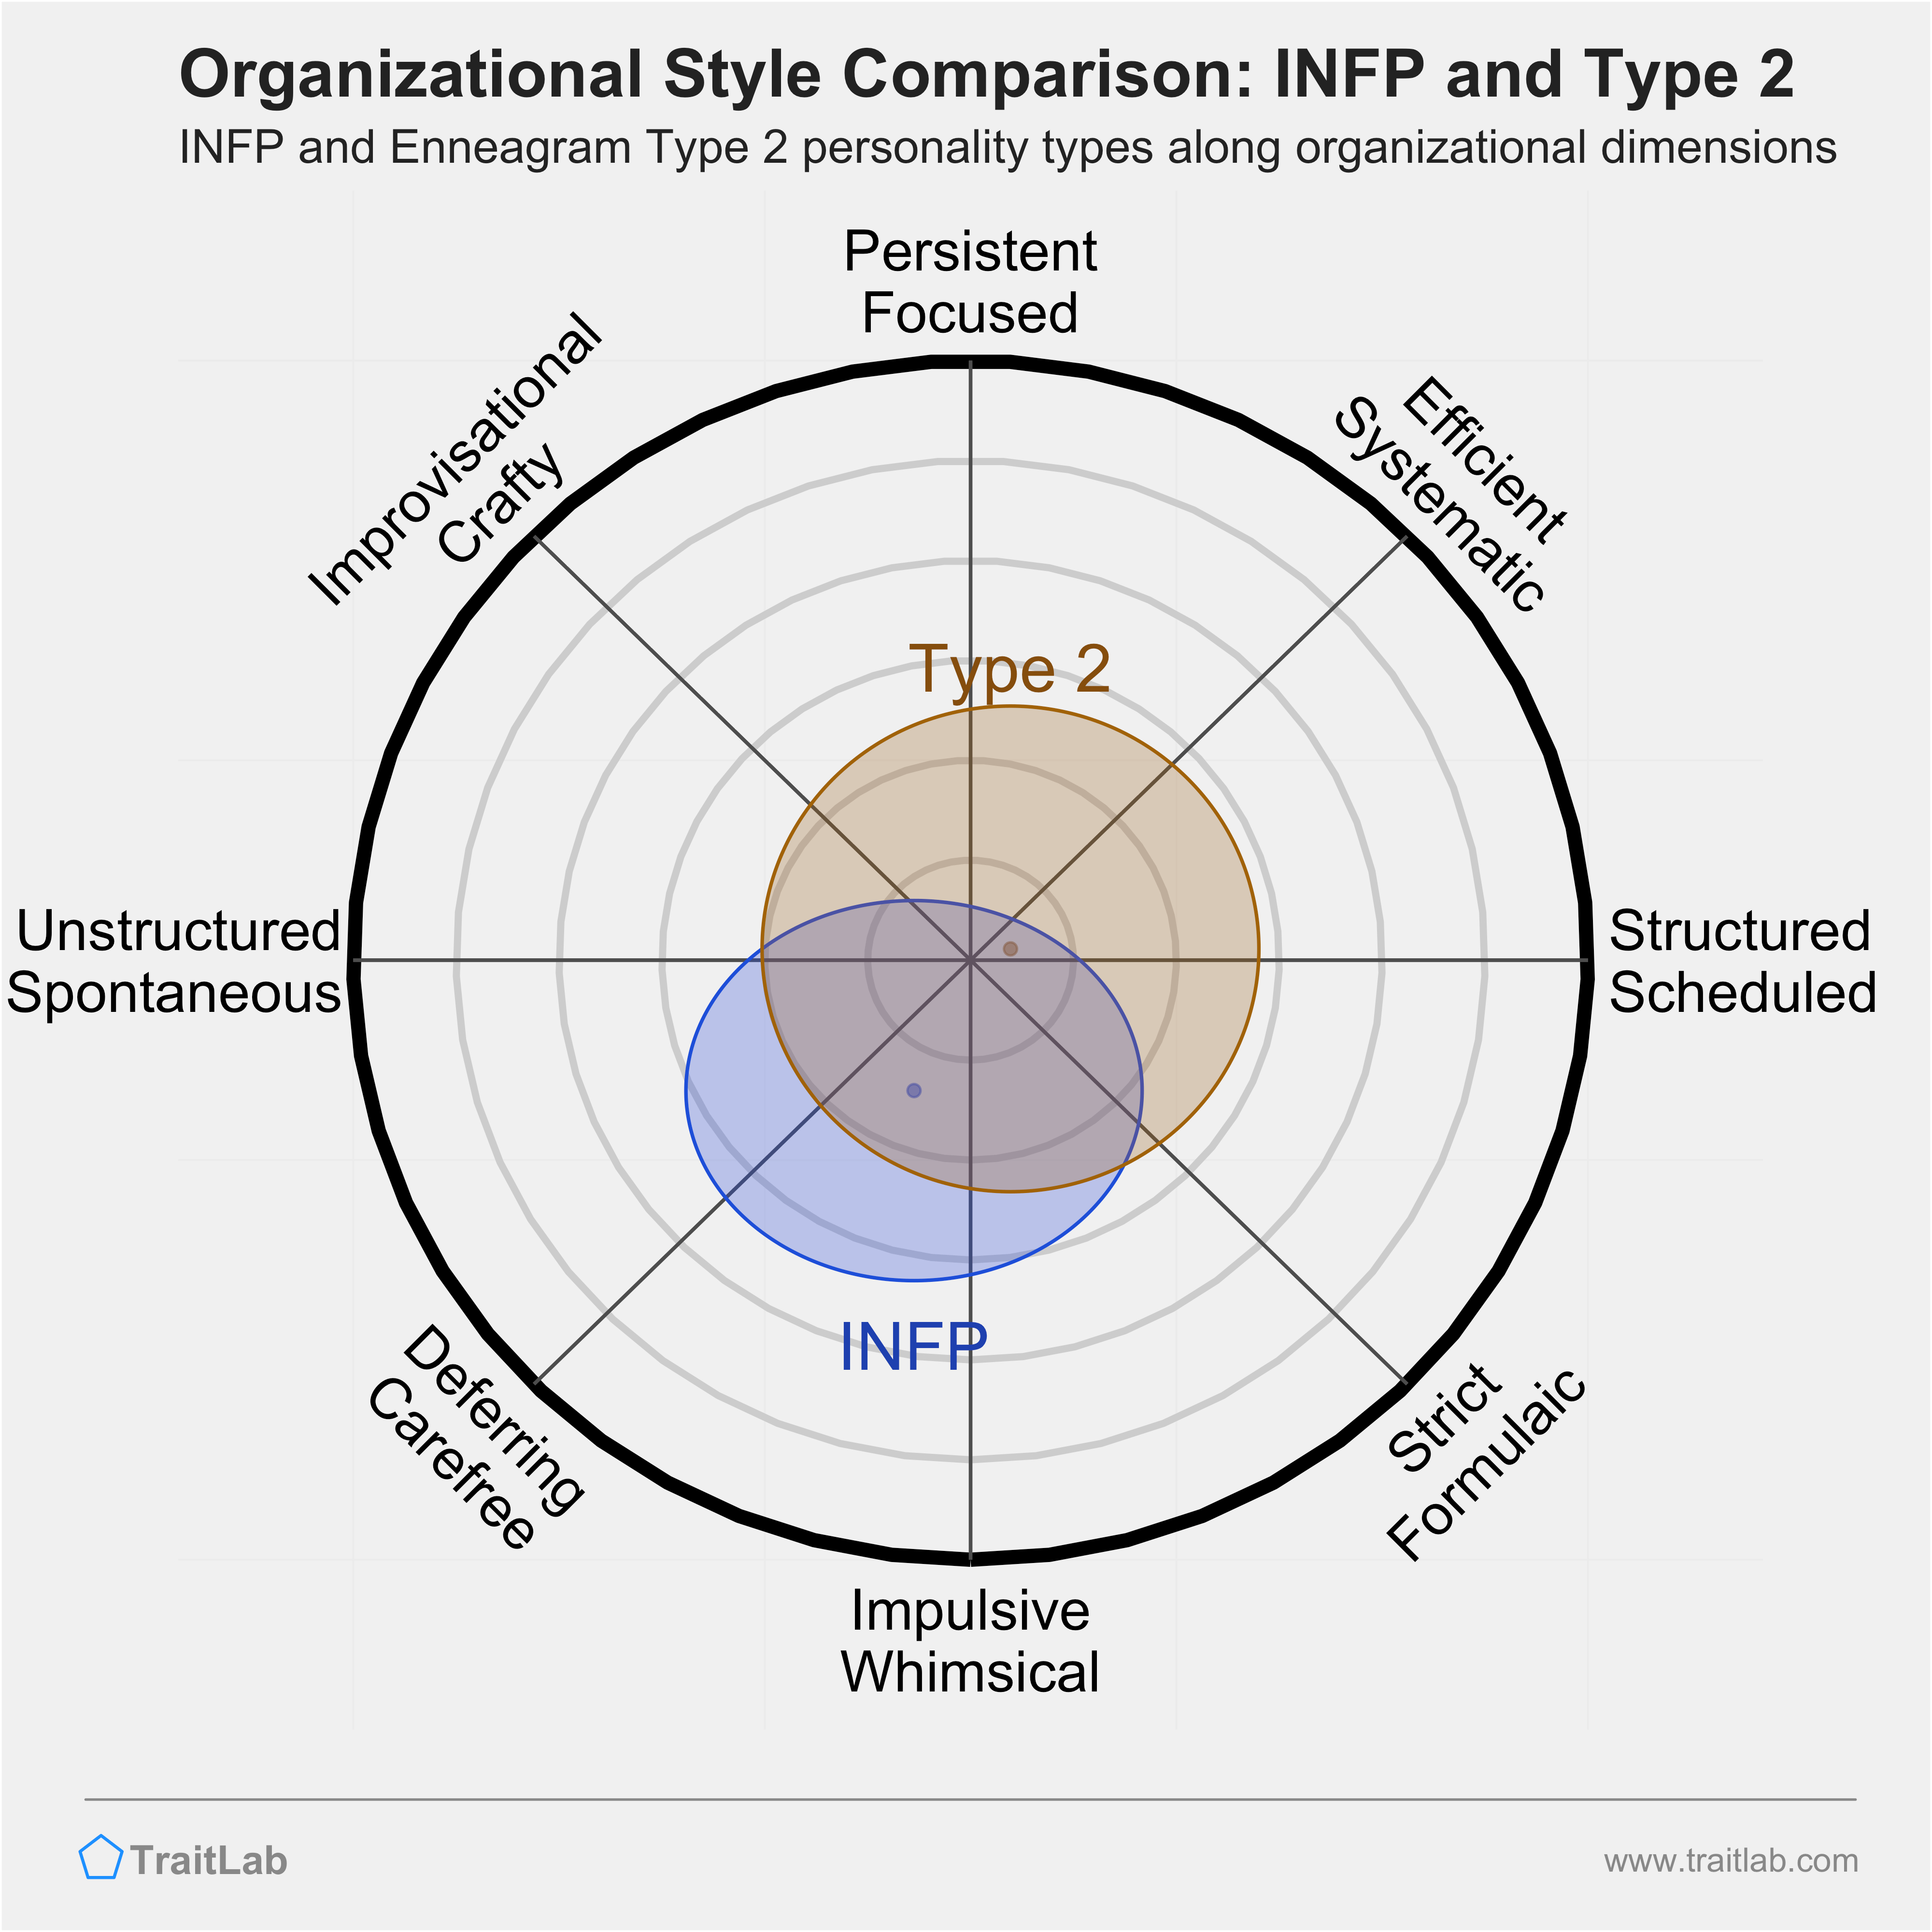 INFP and Type 2 comparison across organizational dimensions